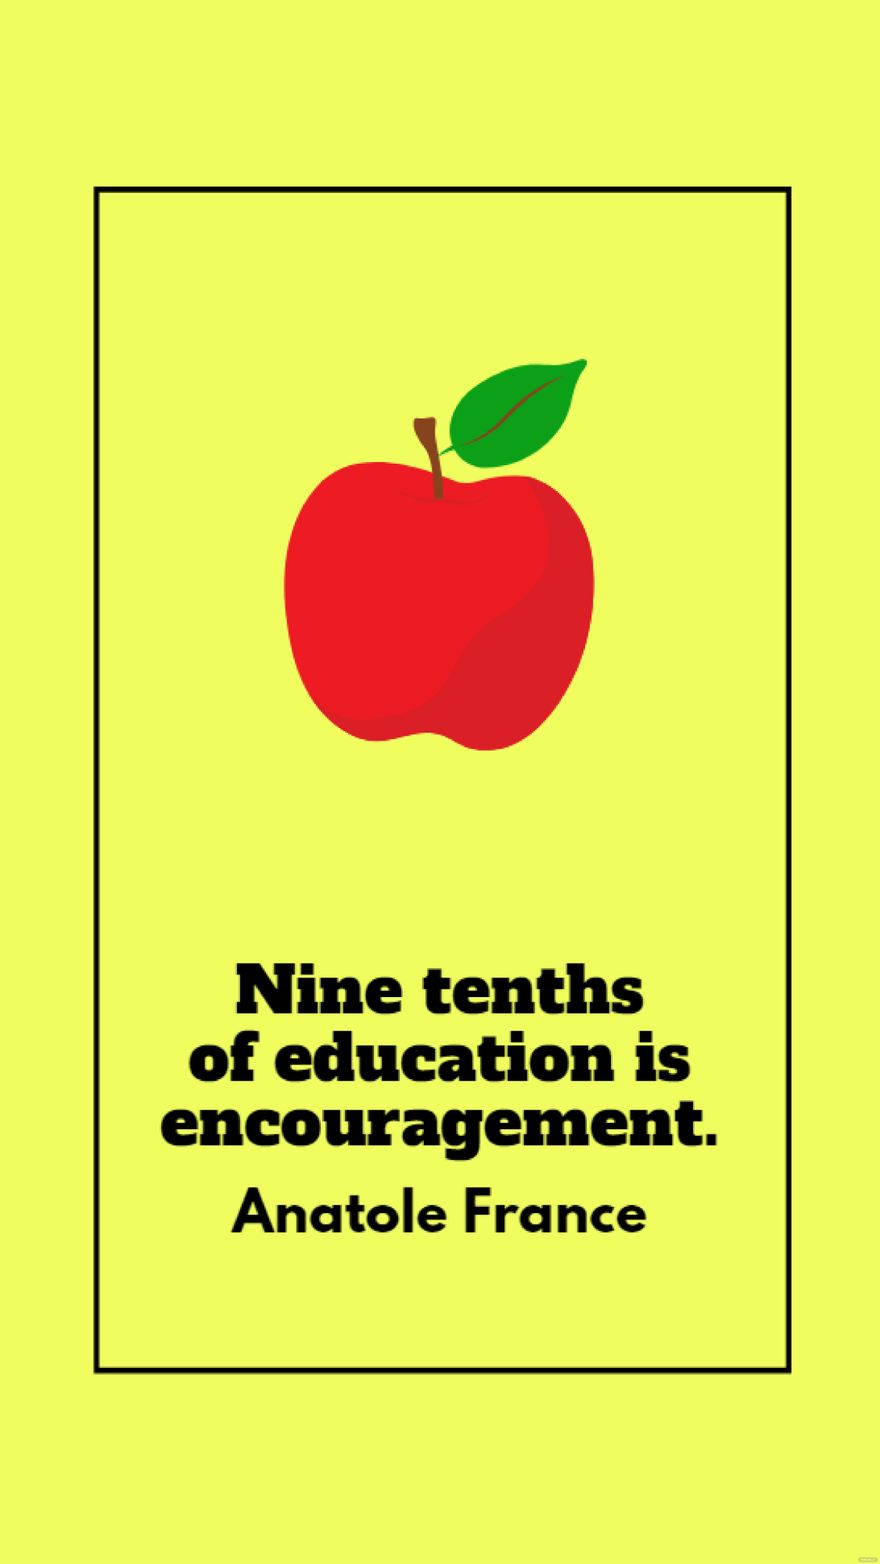 Anatole France - Nine tenths of education is encouragement.